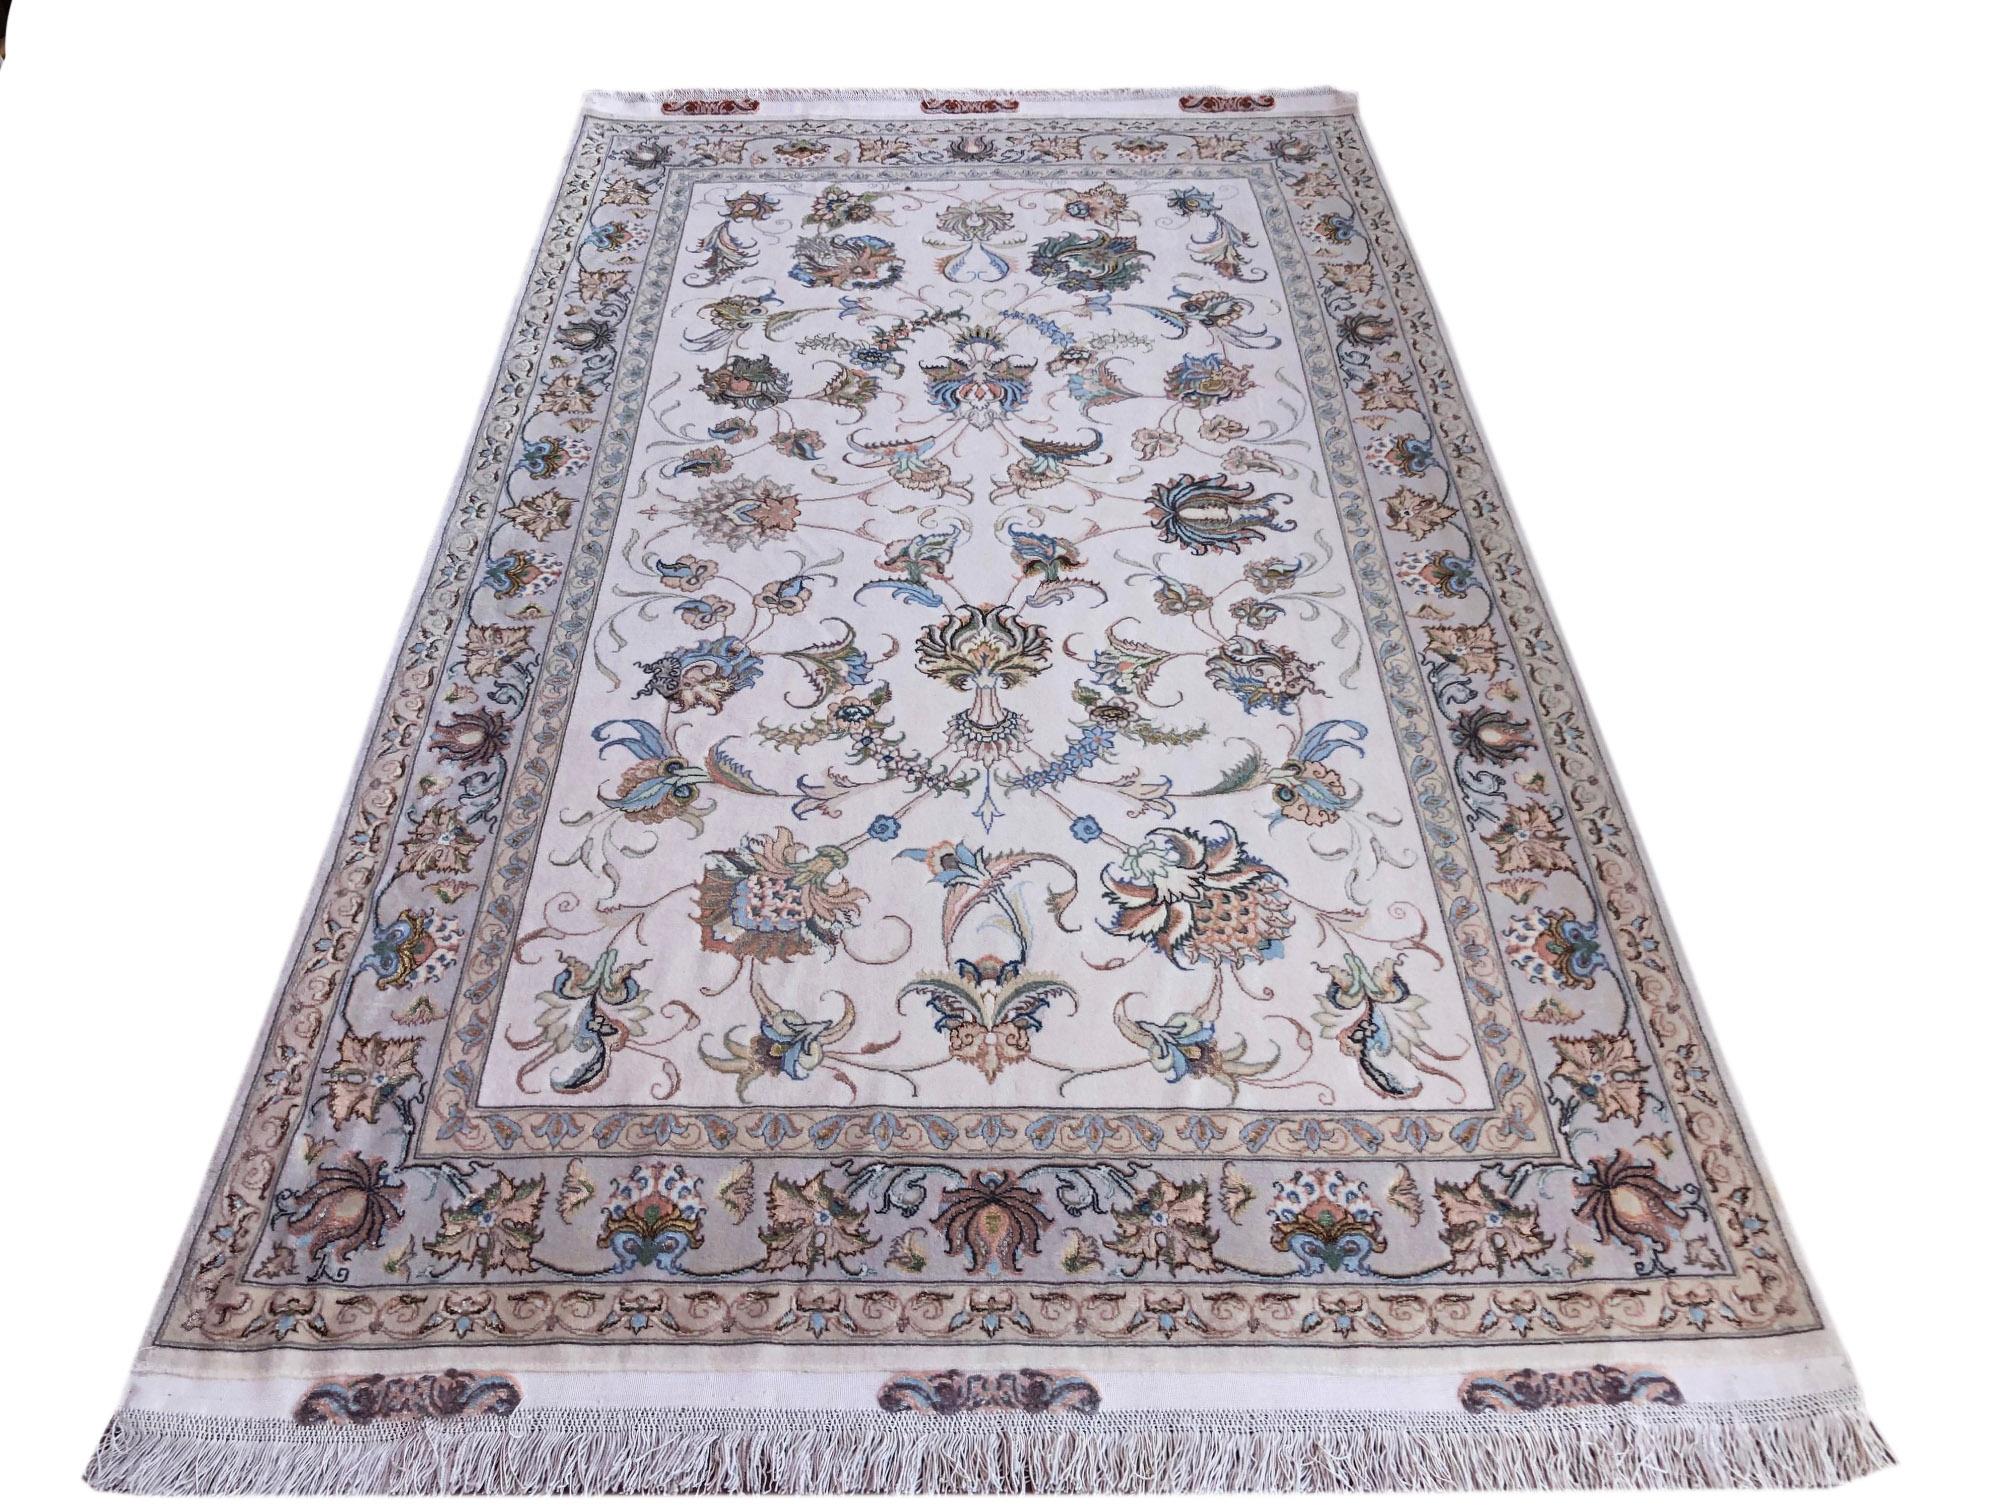 This rug is a hand knotted Persian Tabriz rug with a wool and silk pile on silk foundation. Tabriz is one of the oldest rug weaving centers and makes a huge diversity of types of rugs. This rug features a semi medallion with stunning floral